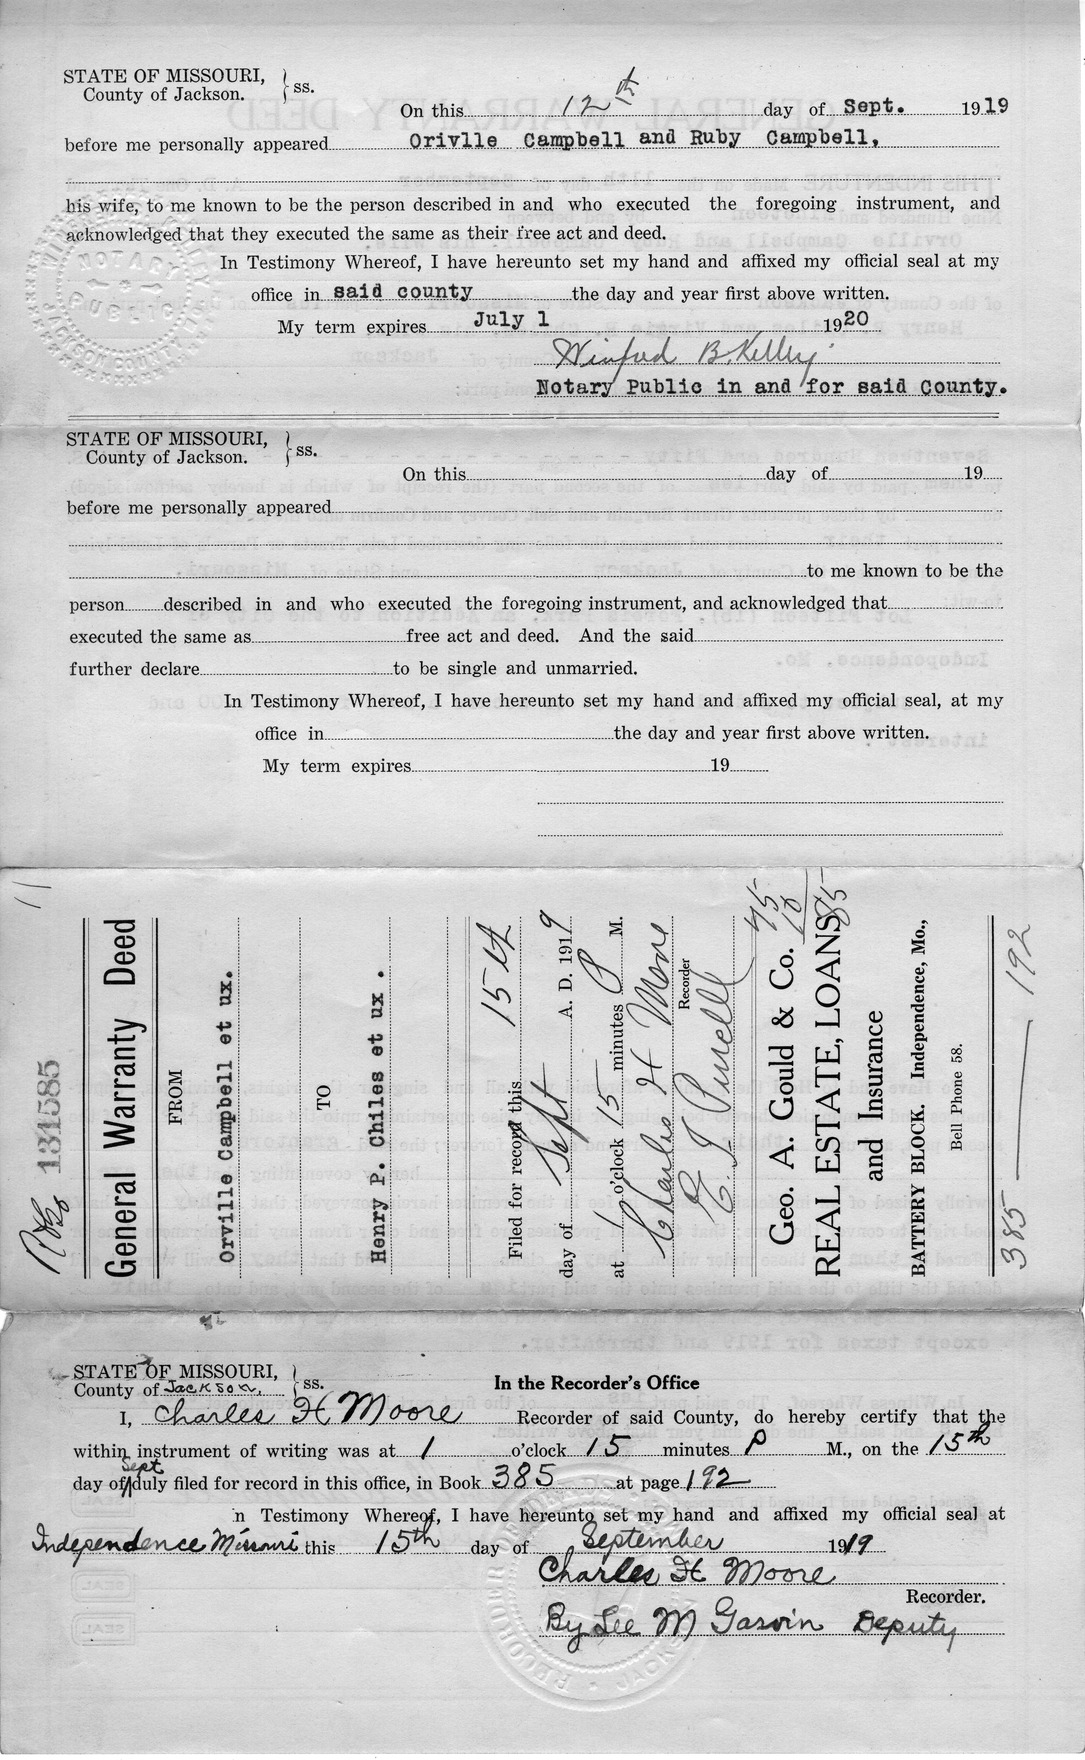 General Warranty Deed from Orville Campbell and Ruby Campbell to Henry P. Chiles and Virgie R. Chiles